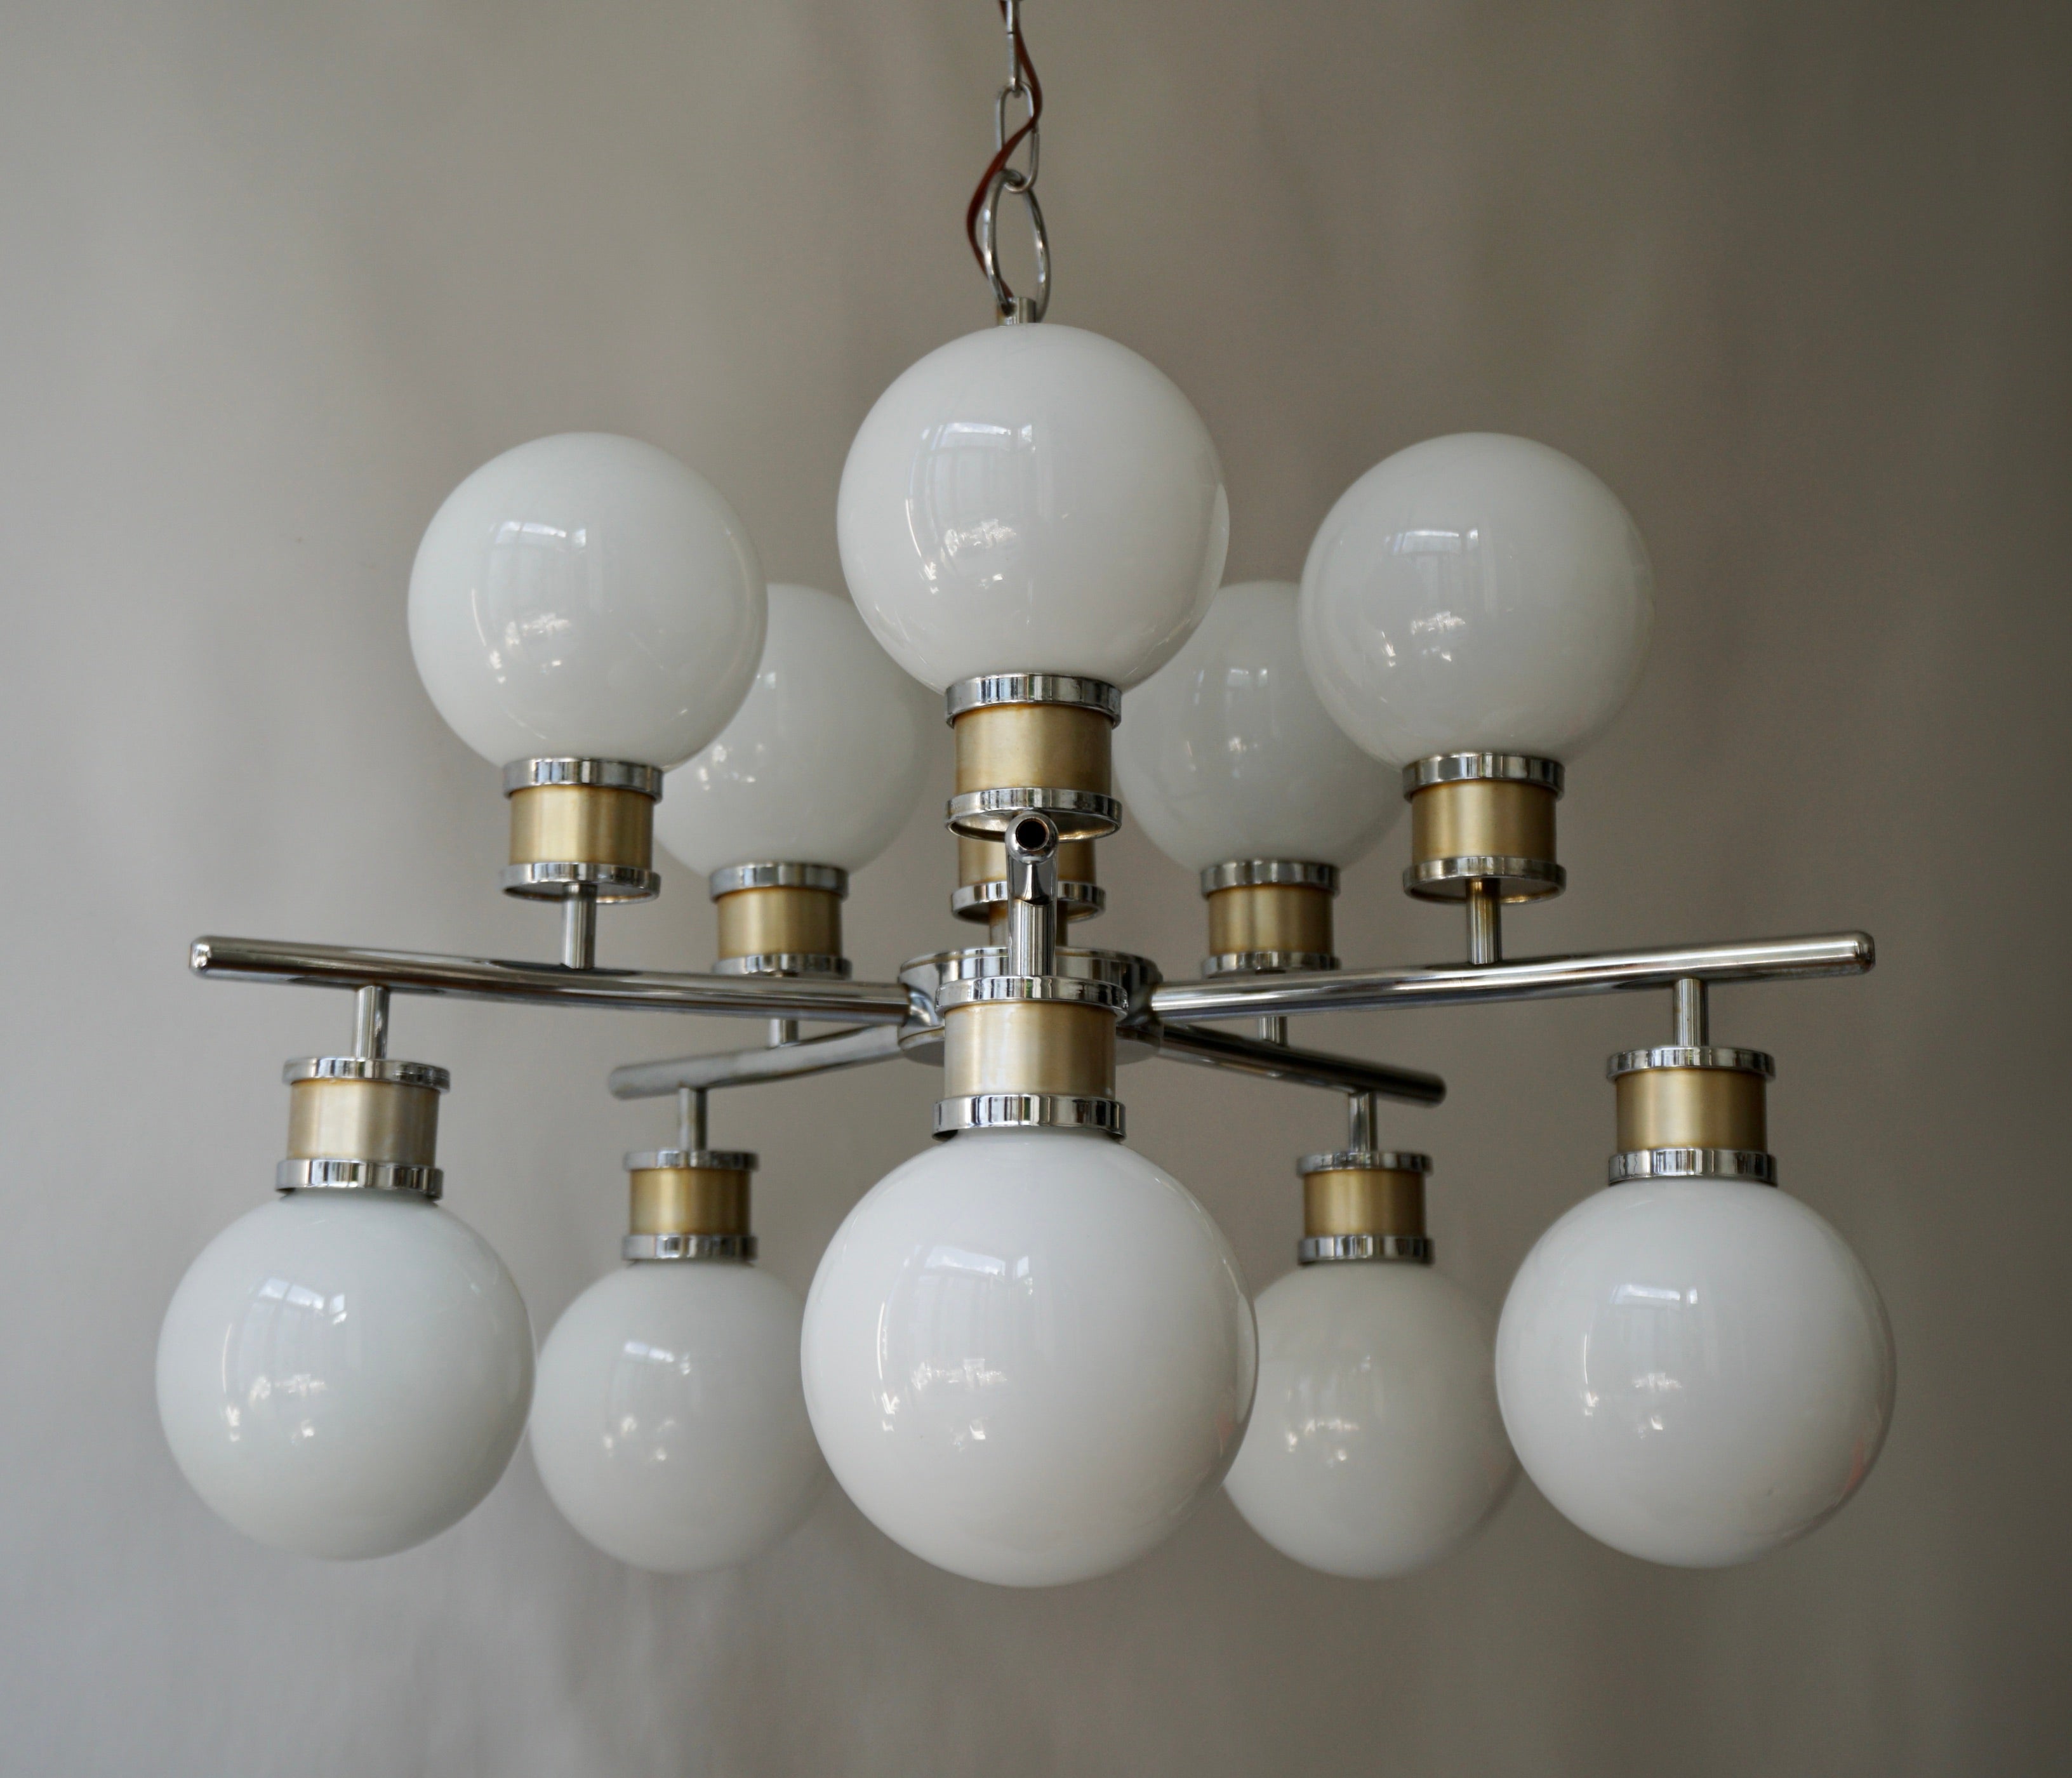 Design Classic Chrome Space Age hanging lamp. Eye catcher with 10 white opaline glass balls. This Design Classic space age lamp has no less than 10 white opaline spheres. The frame is completely chrome and completely intact. Due to the many opaline